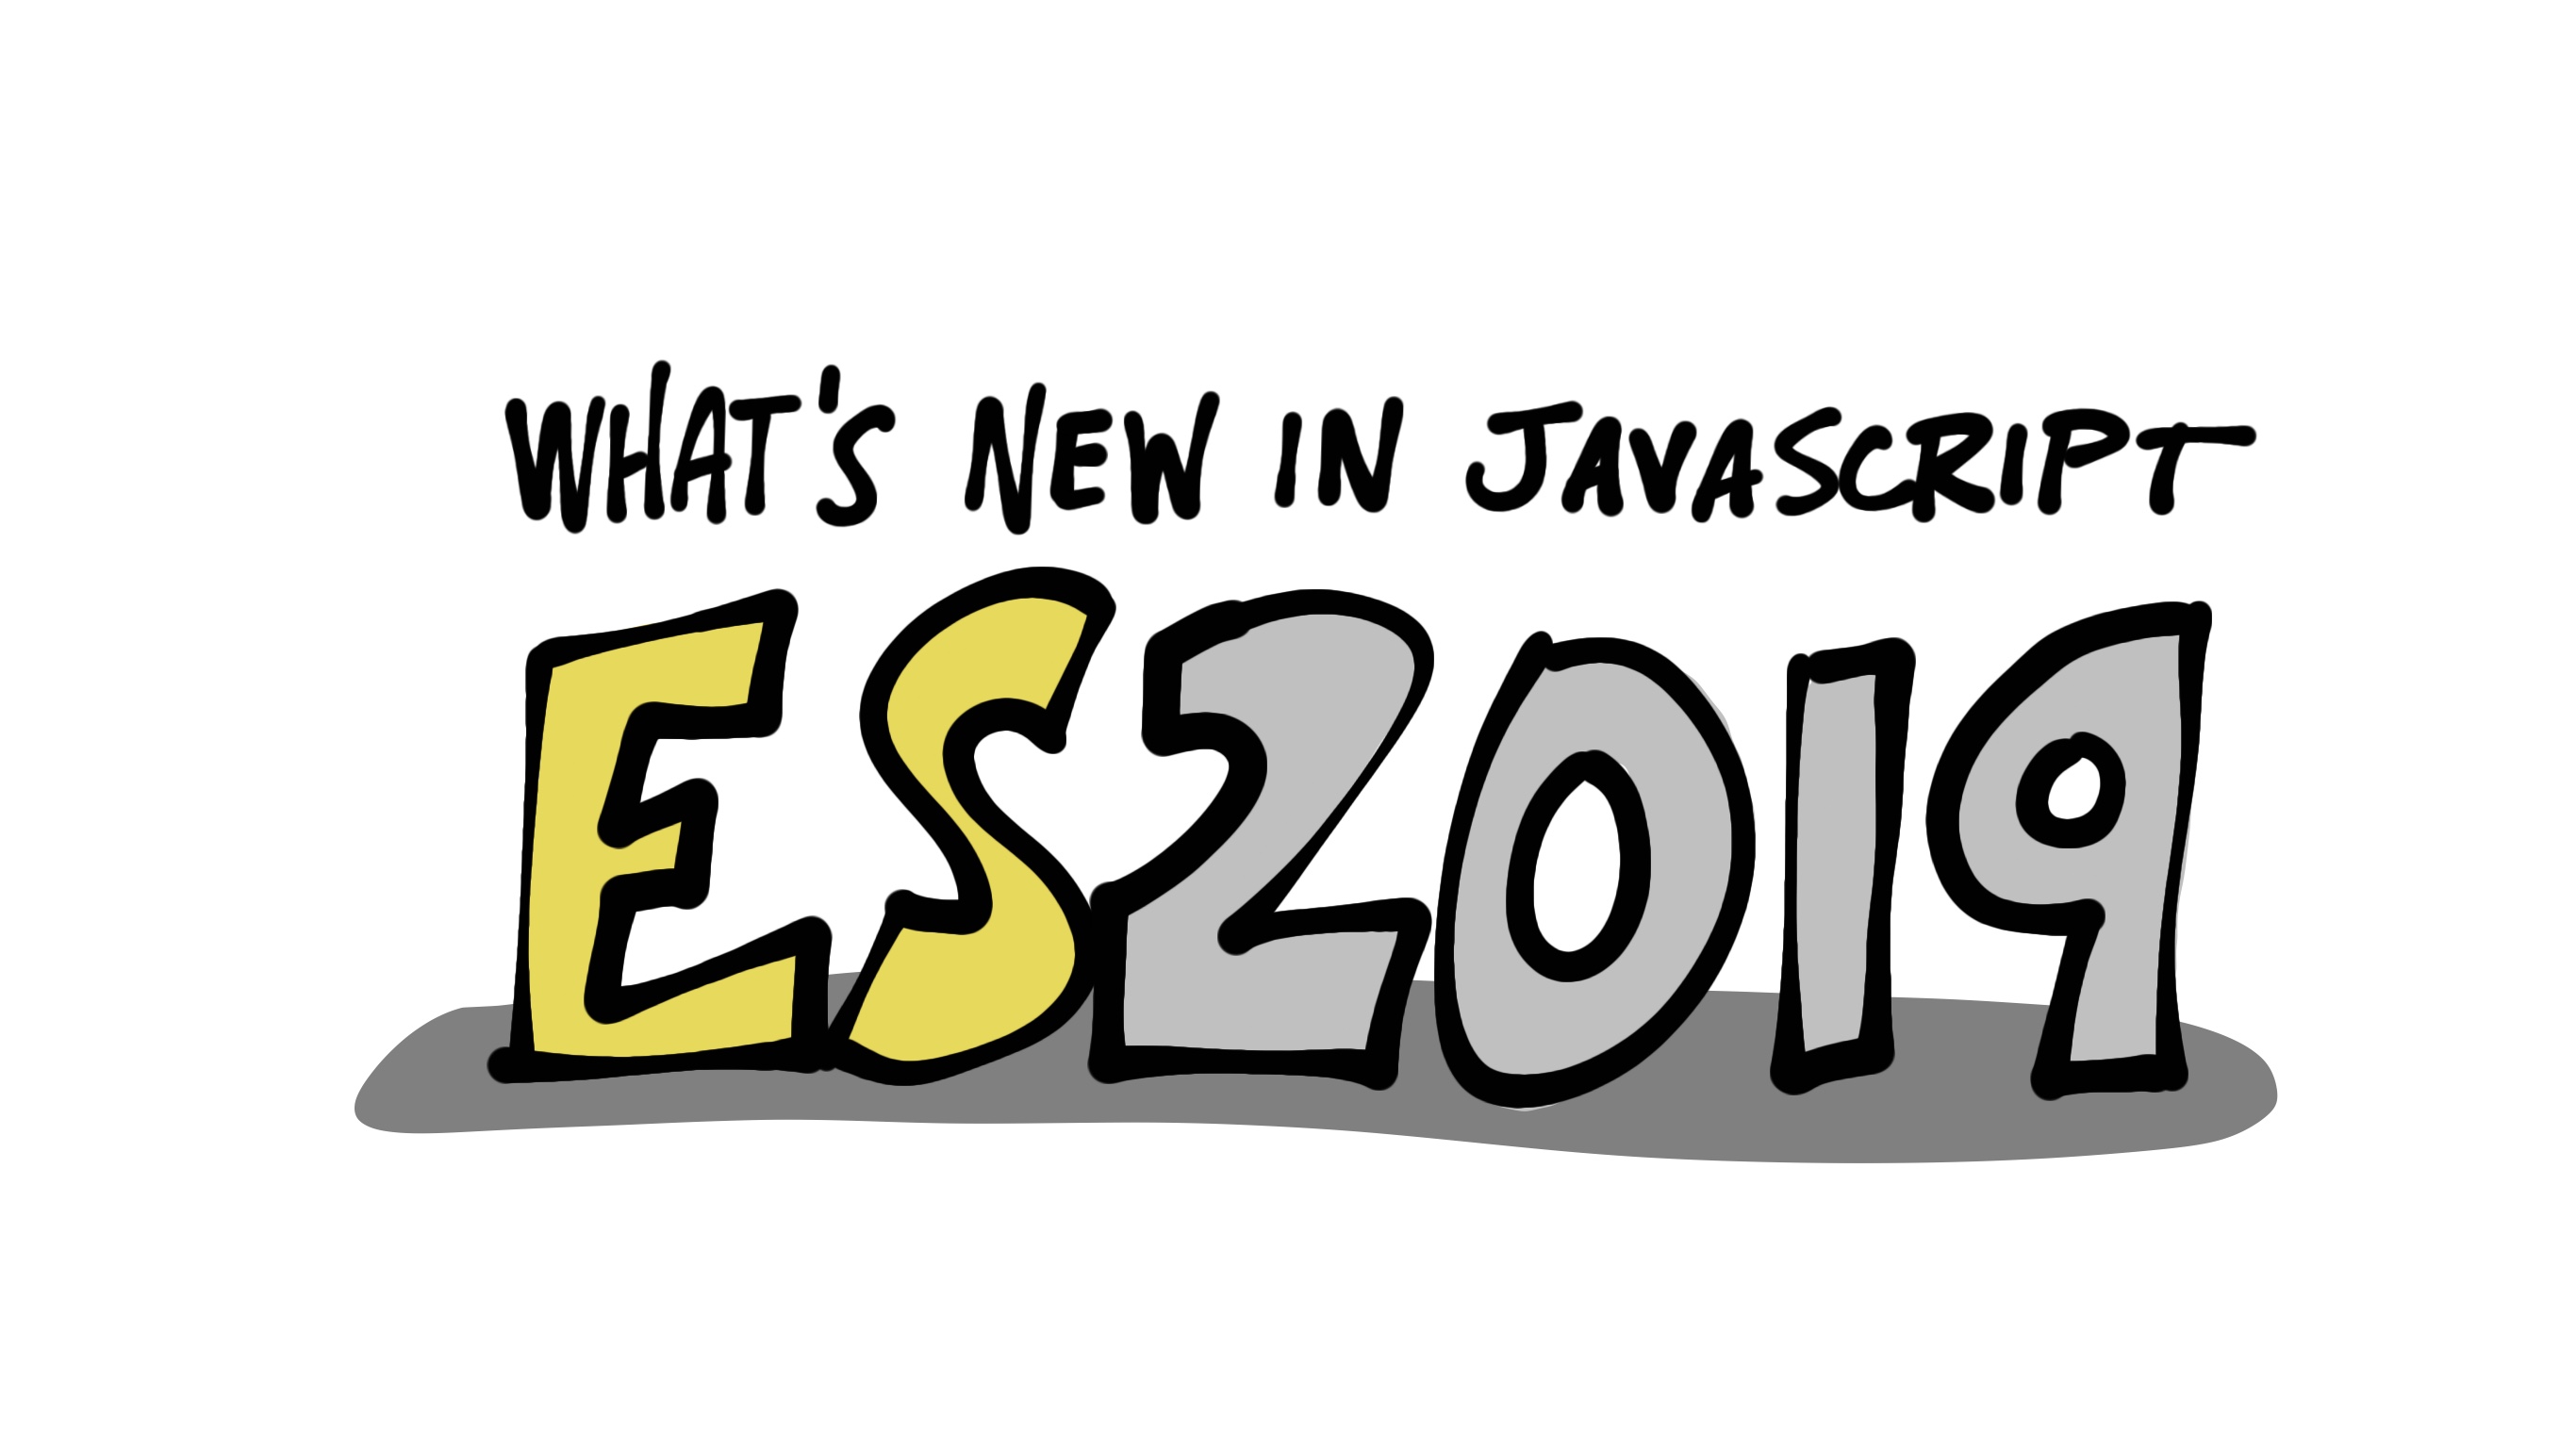 What's new in JavaScript for 2019!